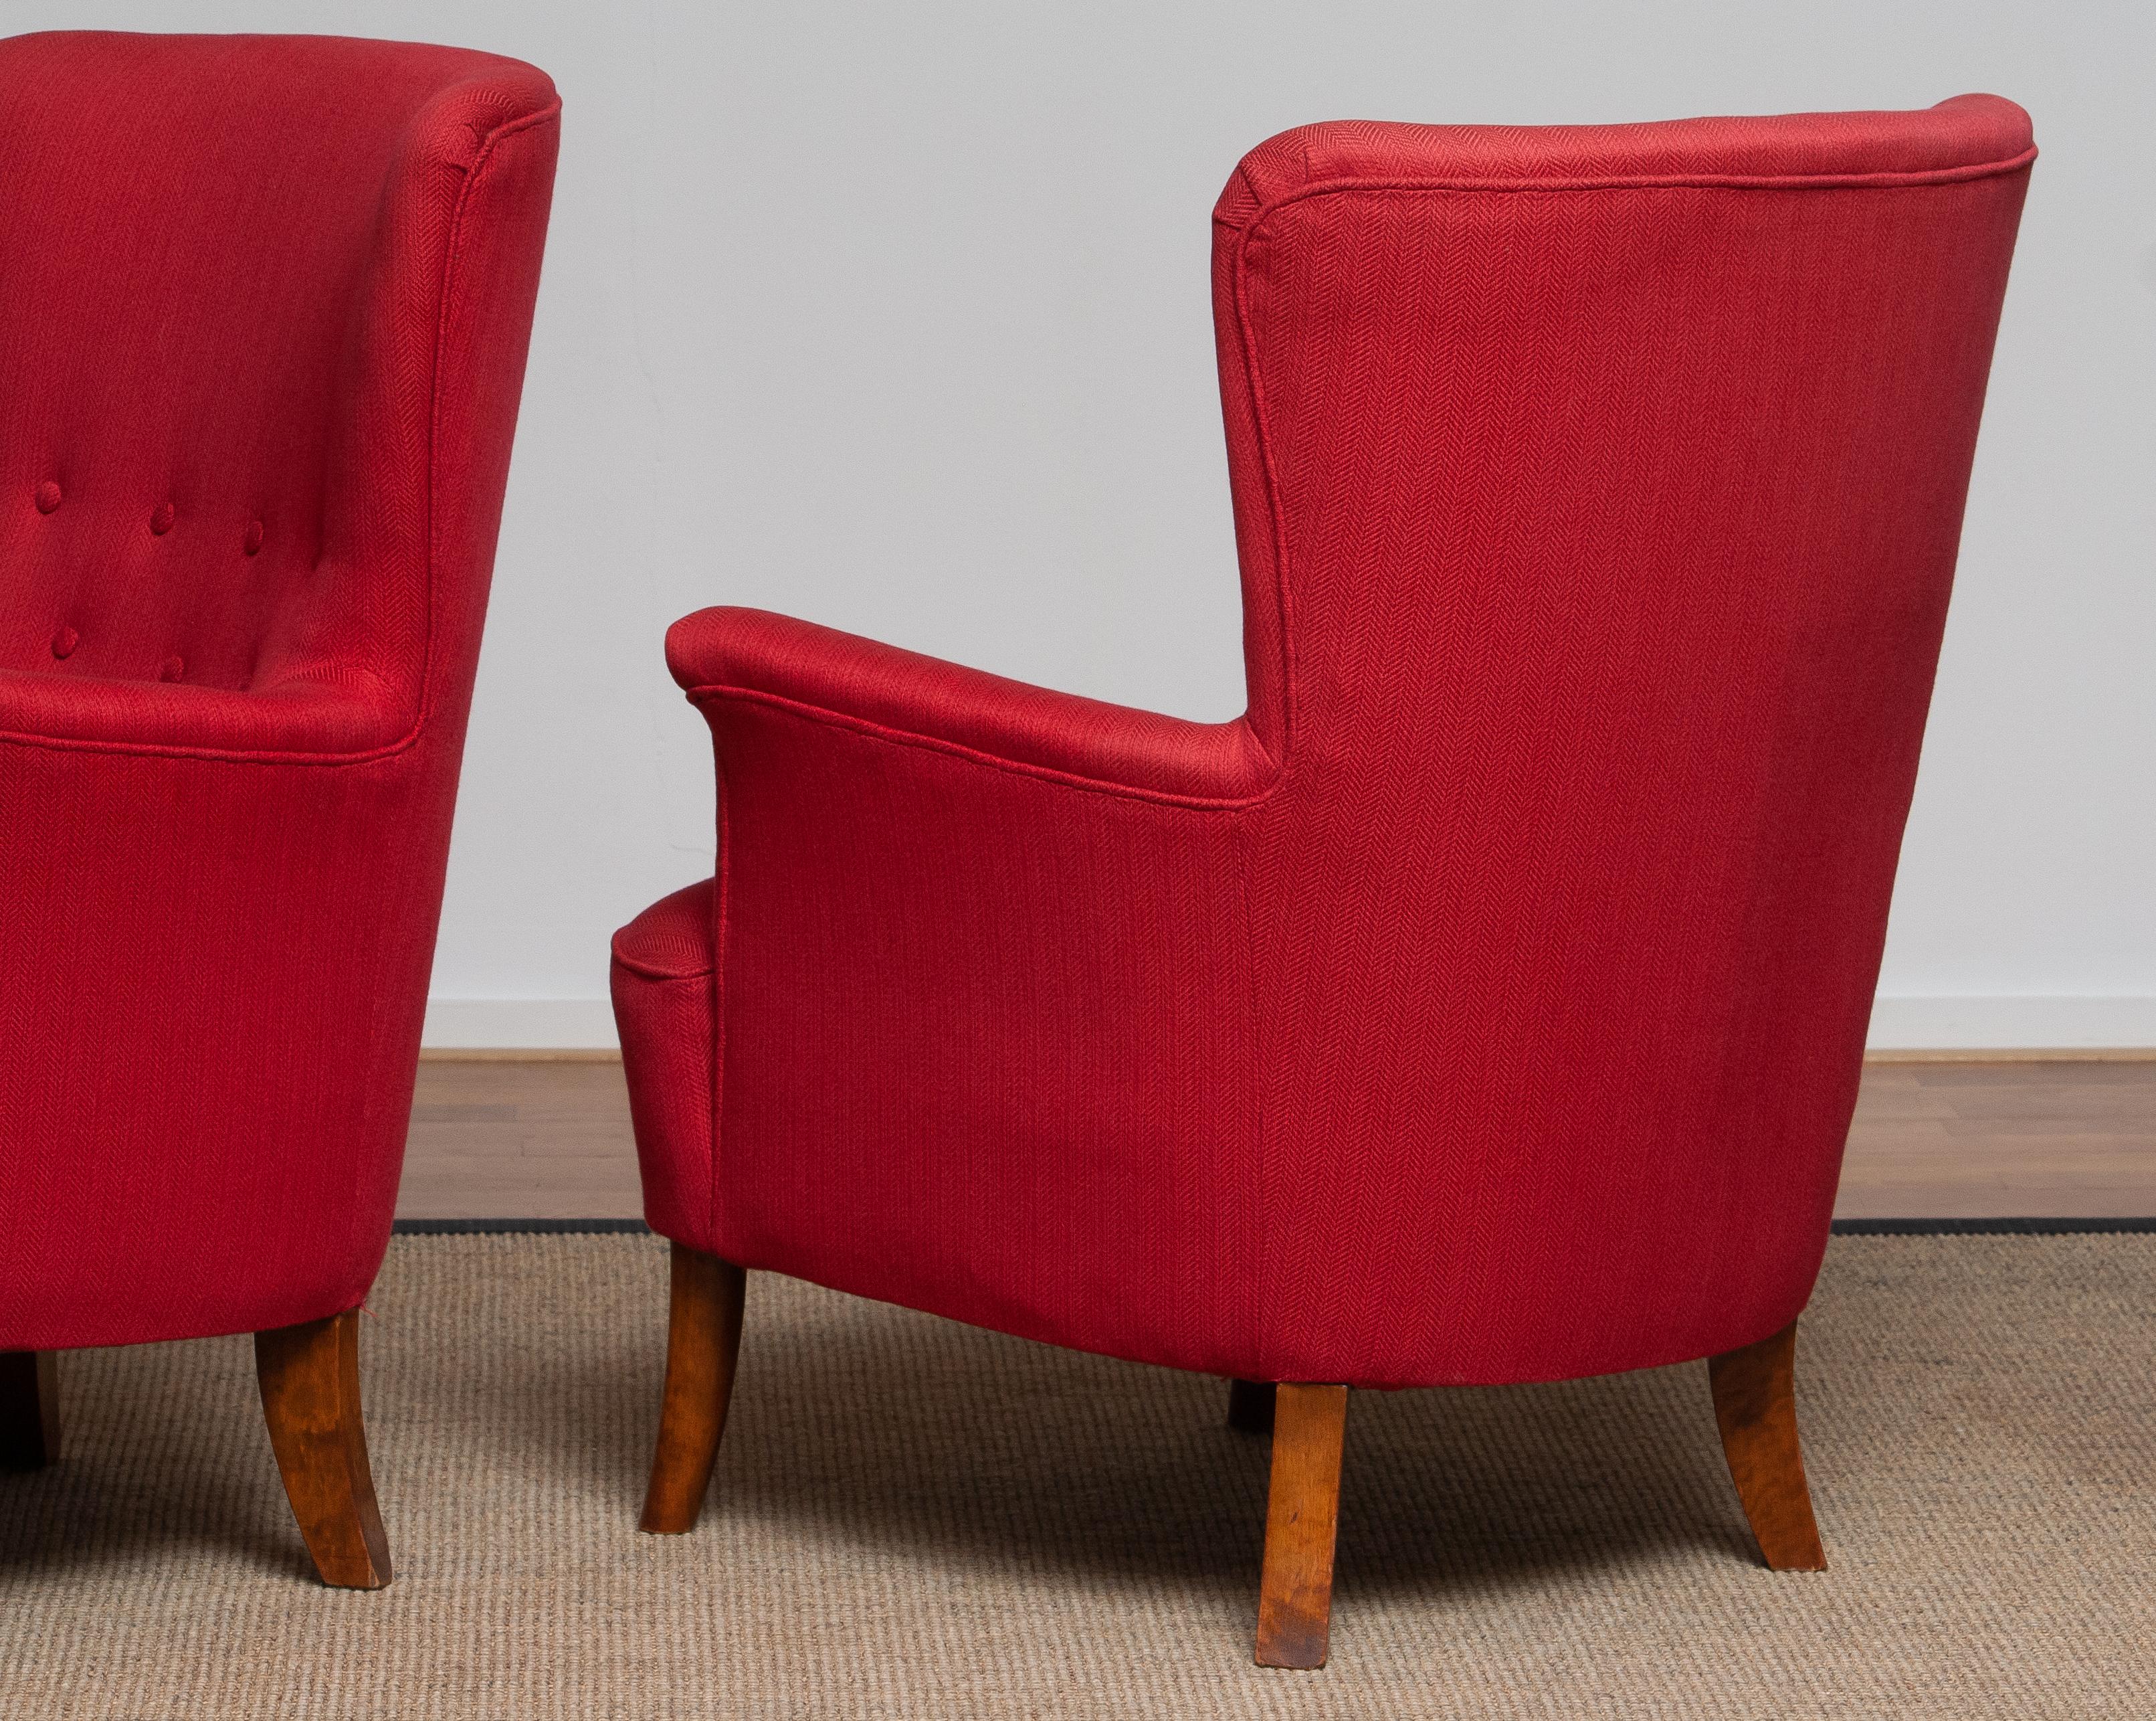 1940s, Pair of Fuchsia Easy or Lounge Chair by Carl Malmsten for OH Sjögren 1